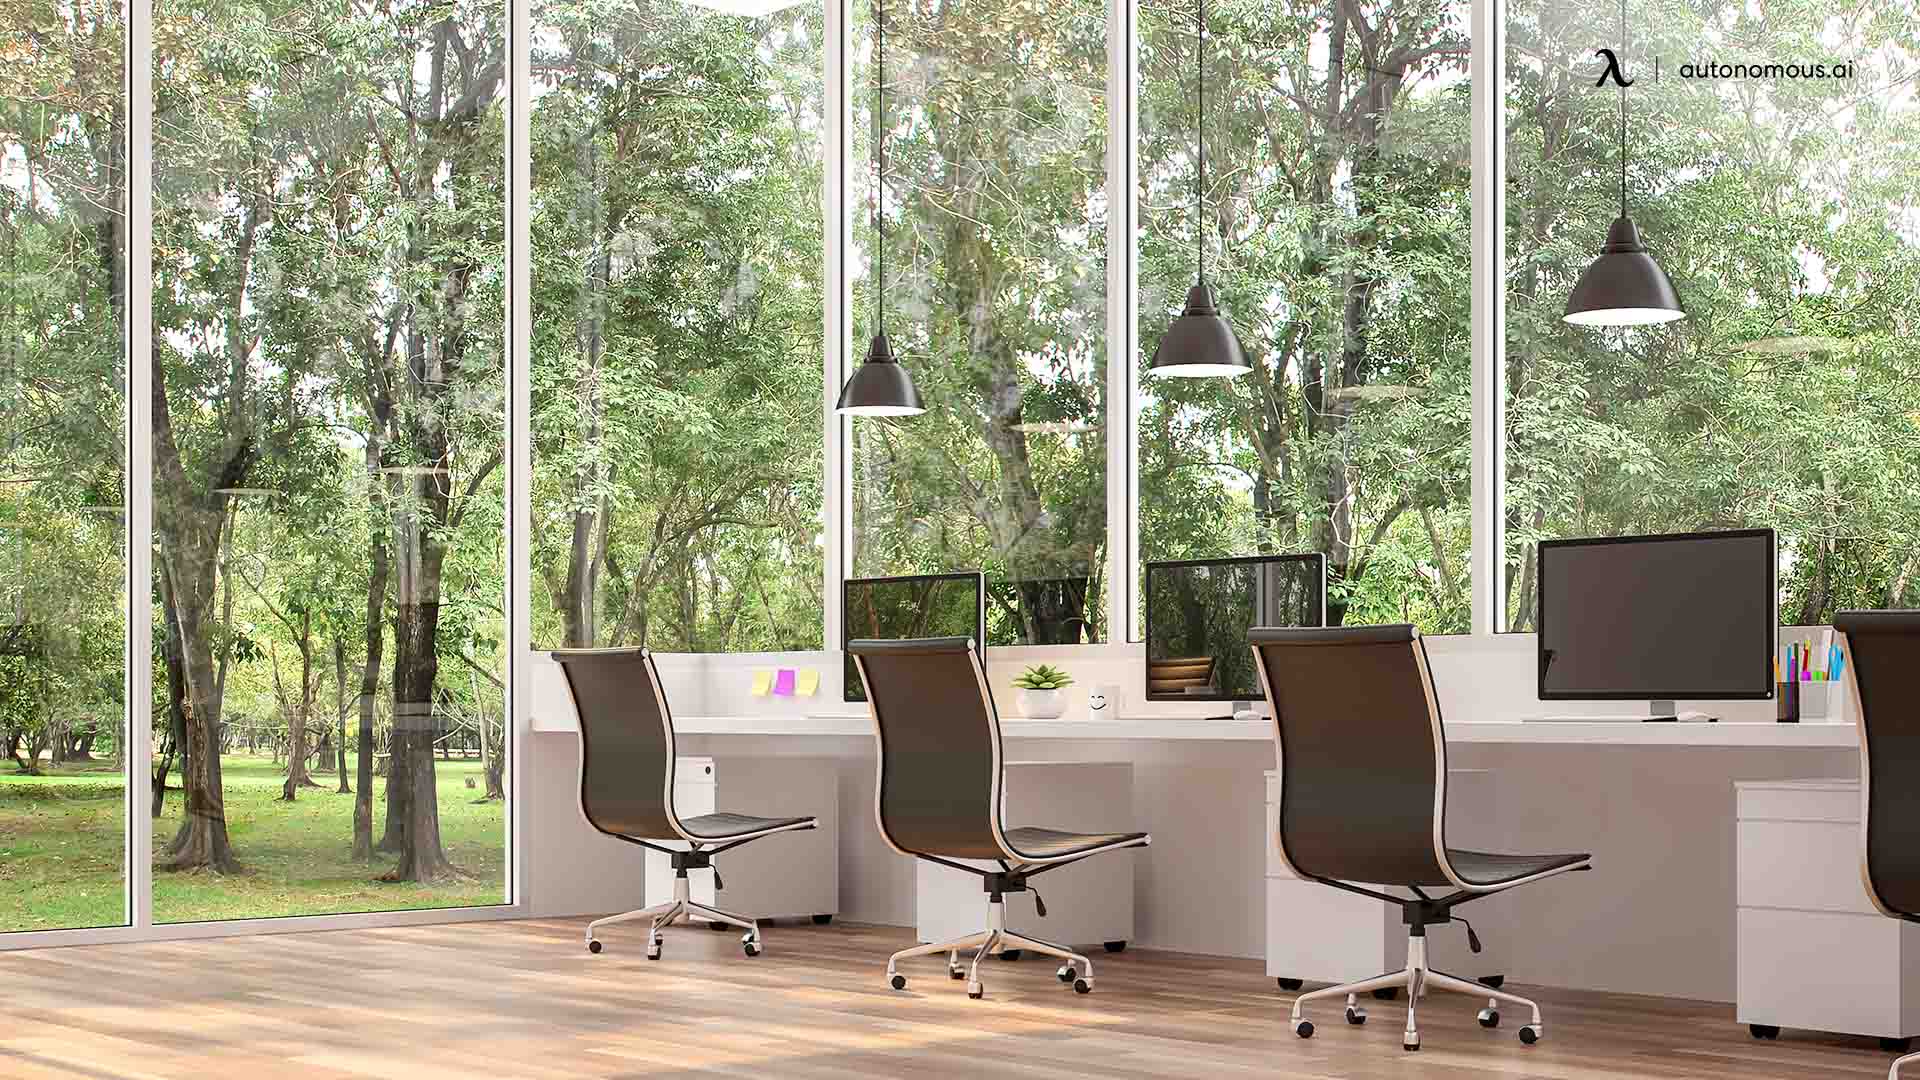 Office decorating ideas can be different depending on whether you are  decorating the home offic  Office furniture layout Work office decor Business  office decor